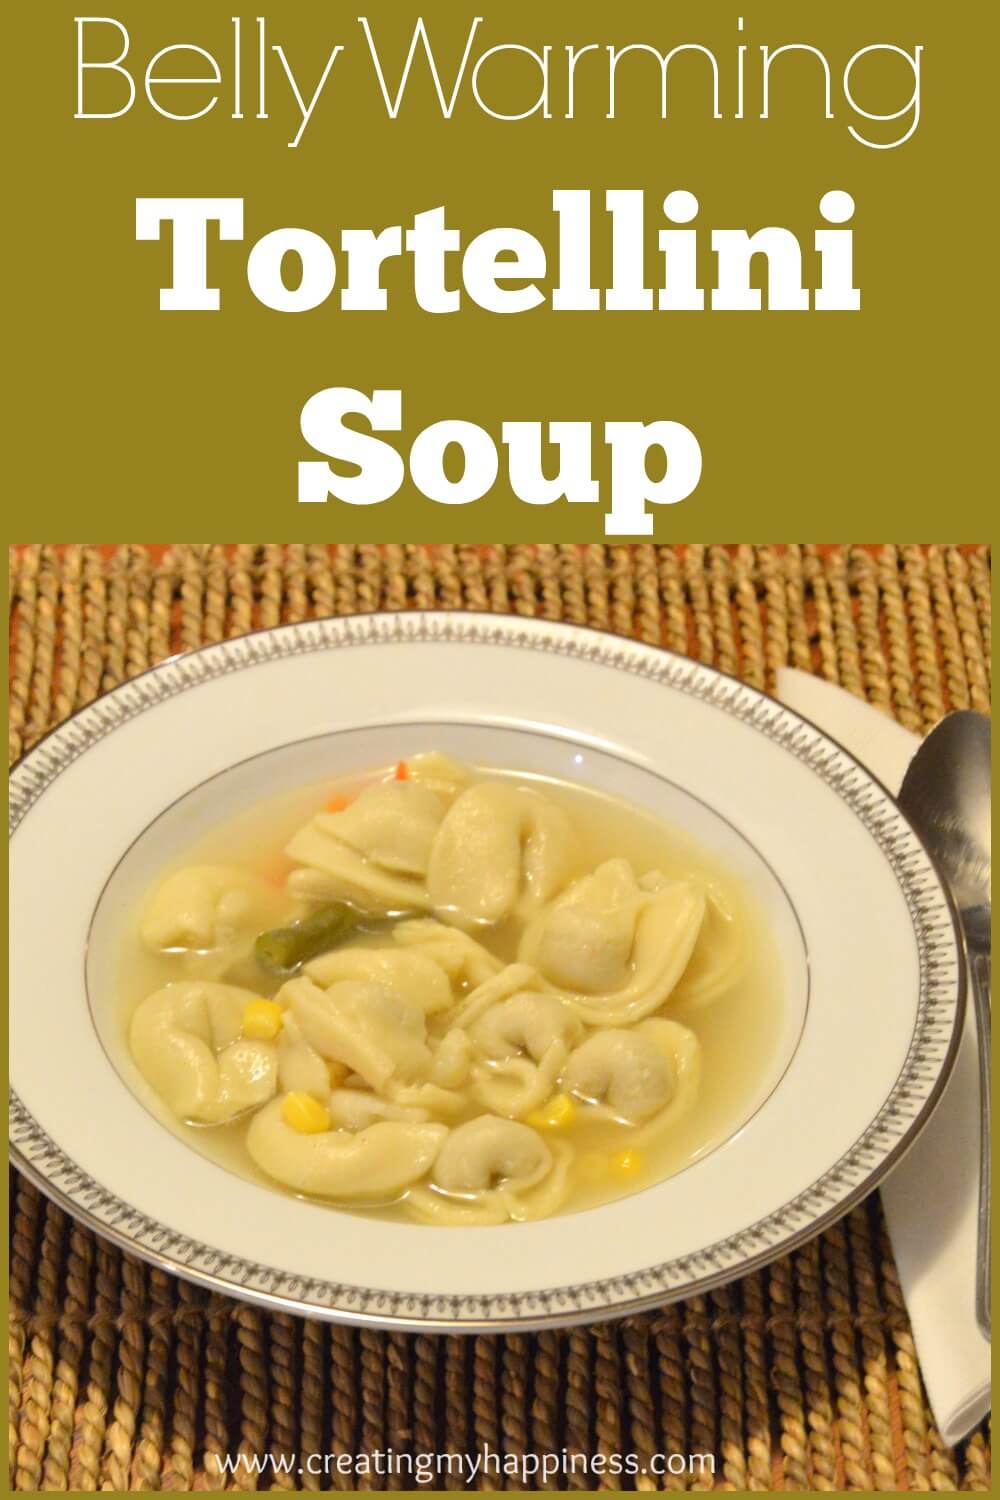 Nothing makes you feel warm from the inside out like a bowl of soup does. Here's a simple, easy to customize recipe for tortellini soup you can make in your slow cooker!